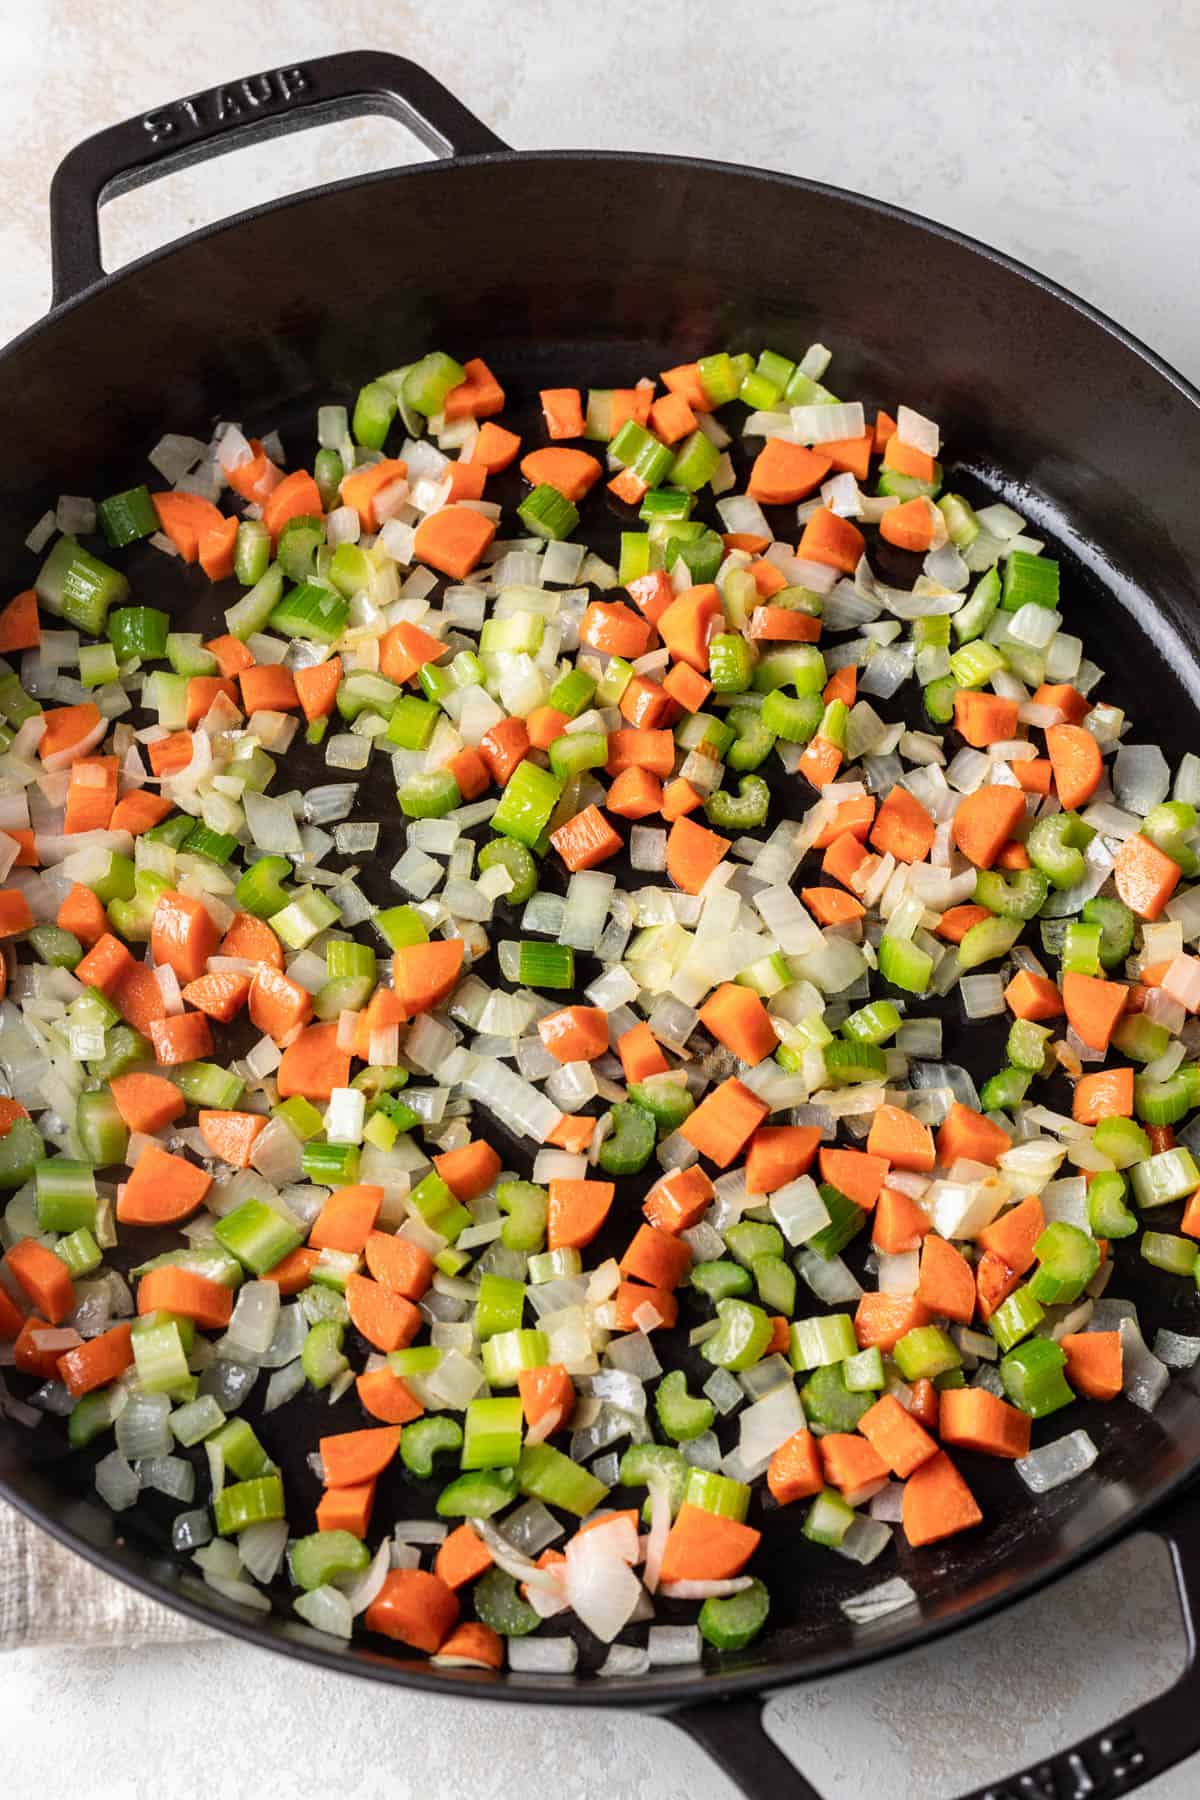 Chopped carrots, onions, and celery in a large skillet.